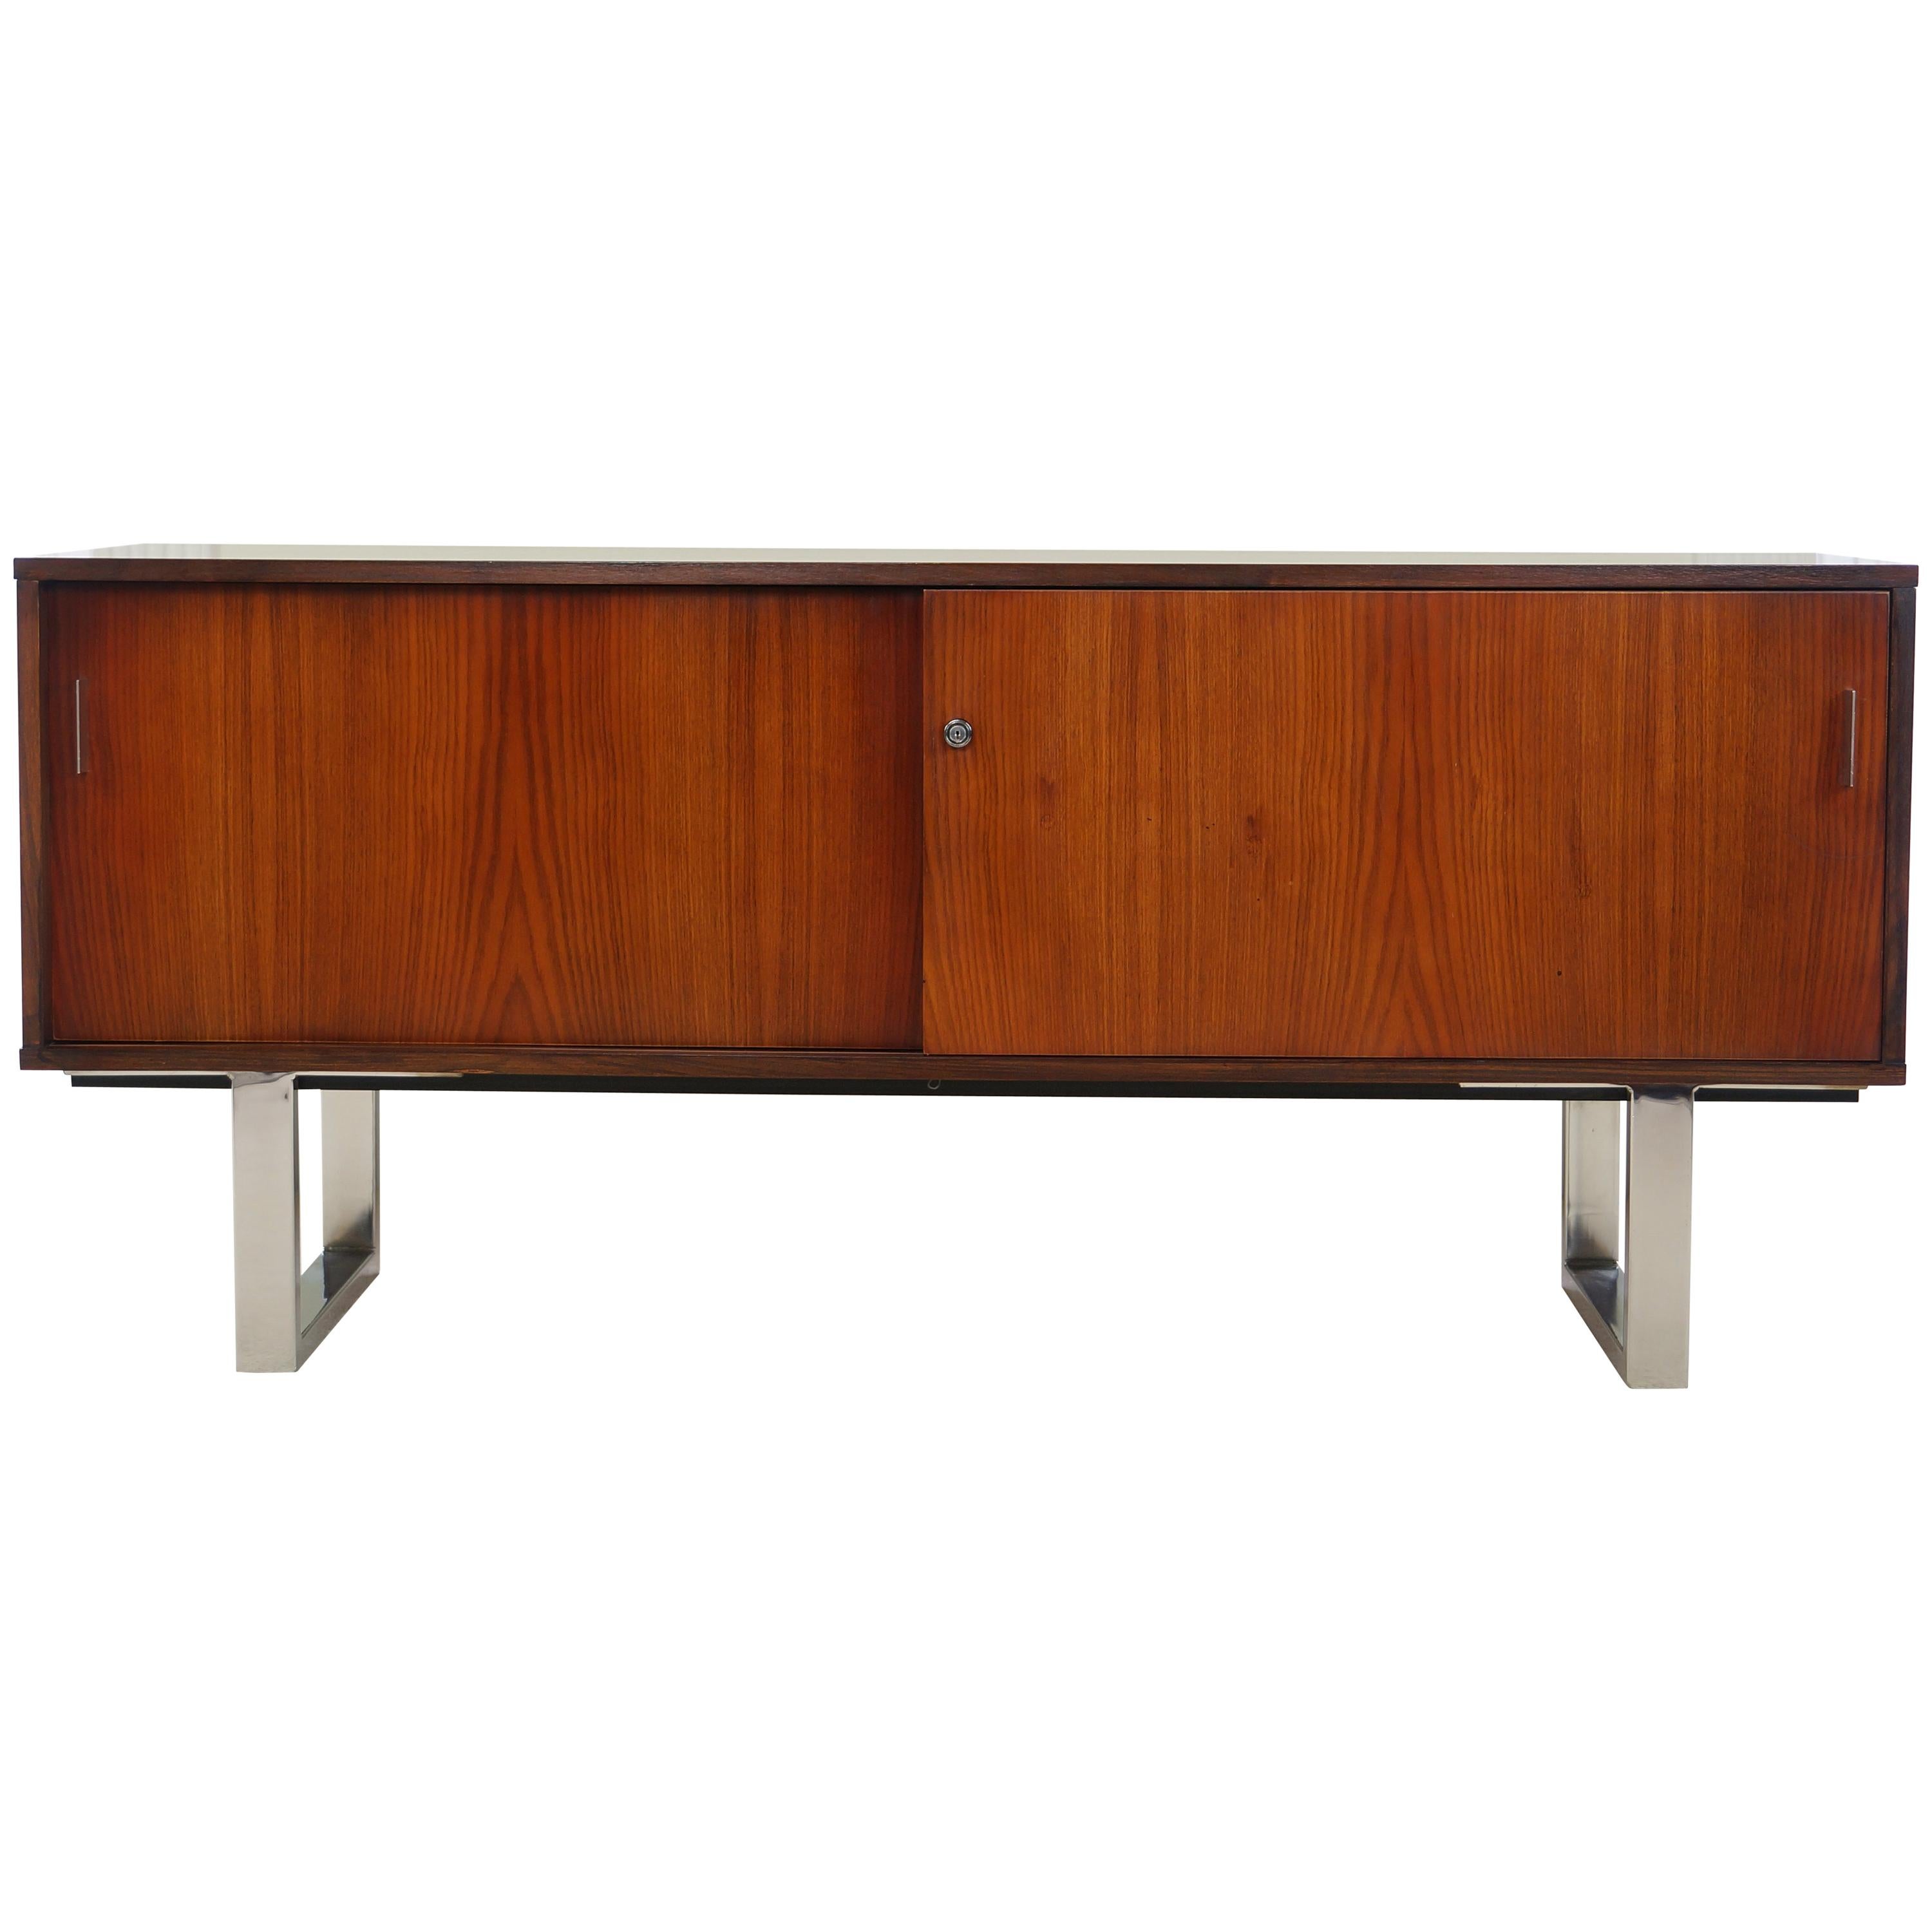 Vintage Gordon Russell Rosewood & Chrome Sideboard / Credenza, Retro Cabinet